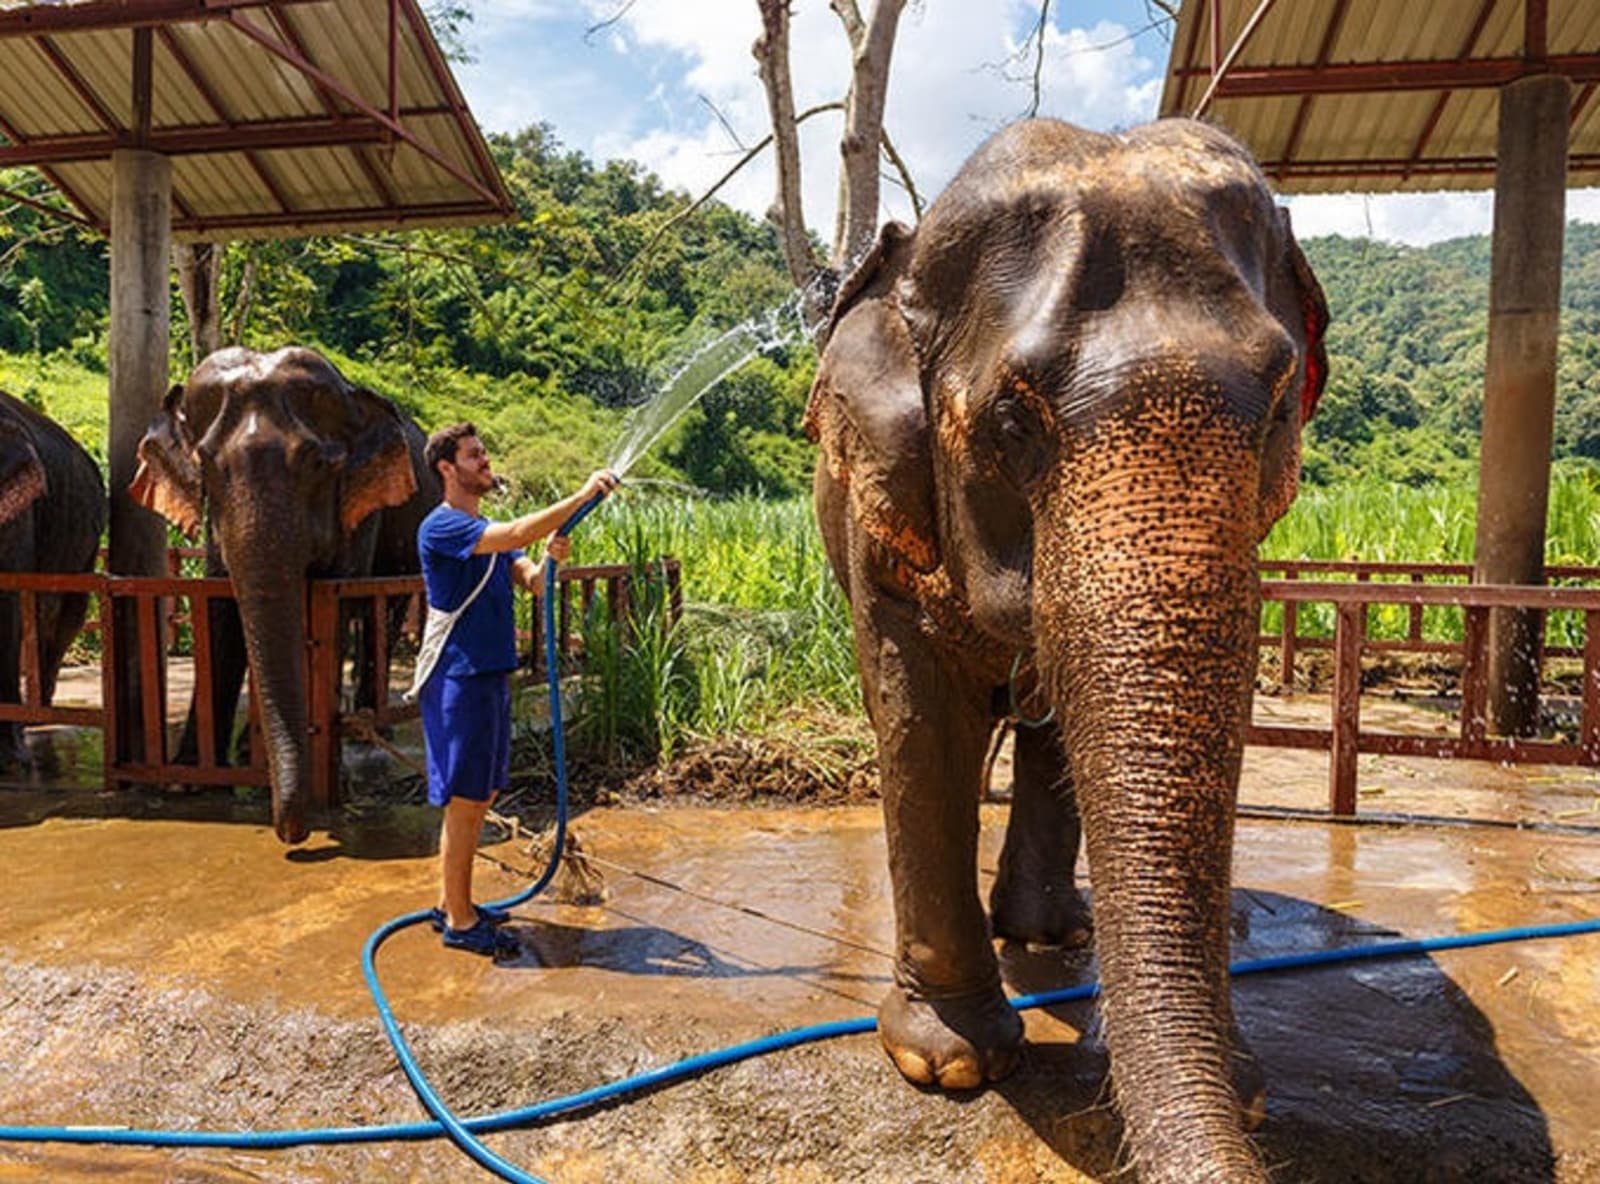 rs-elephants-being-washed-shutterstock_1099021703.jpg